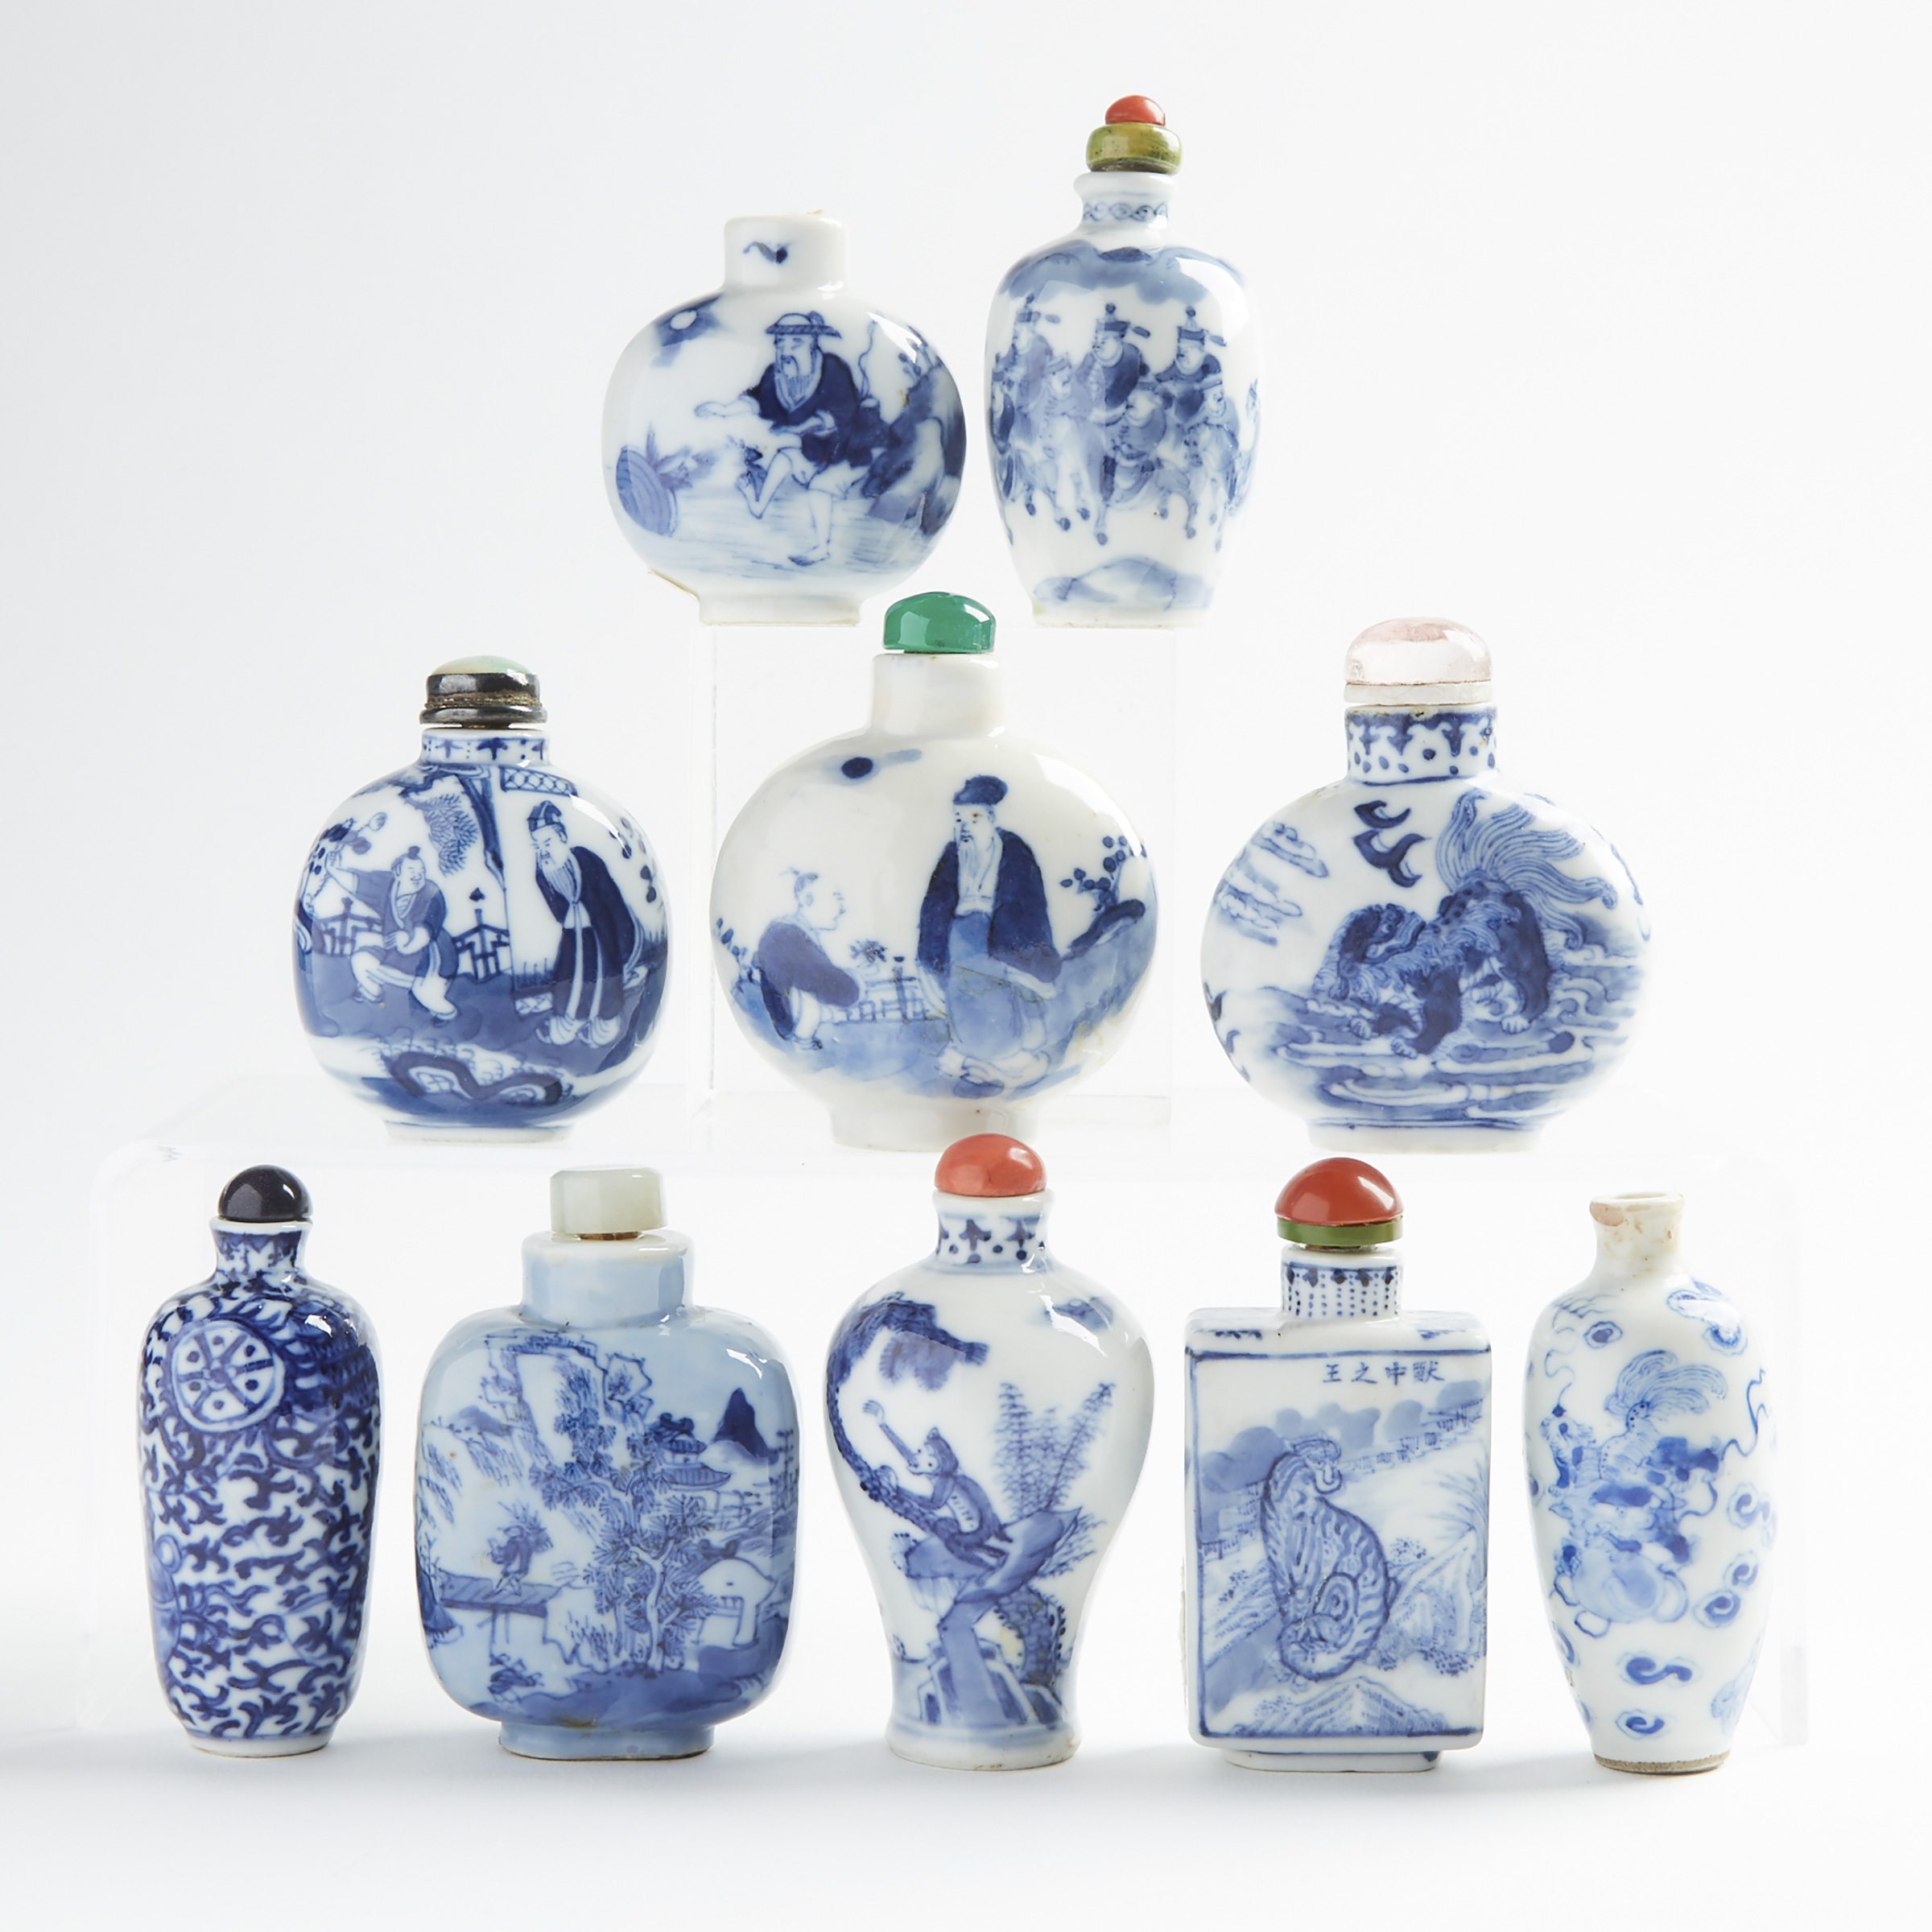 A Group of Ten Blue and White Snuff Bottles, 19th/20th Century